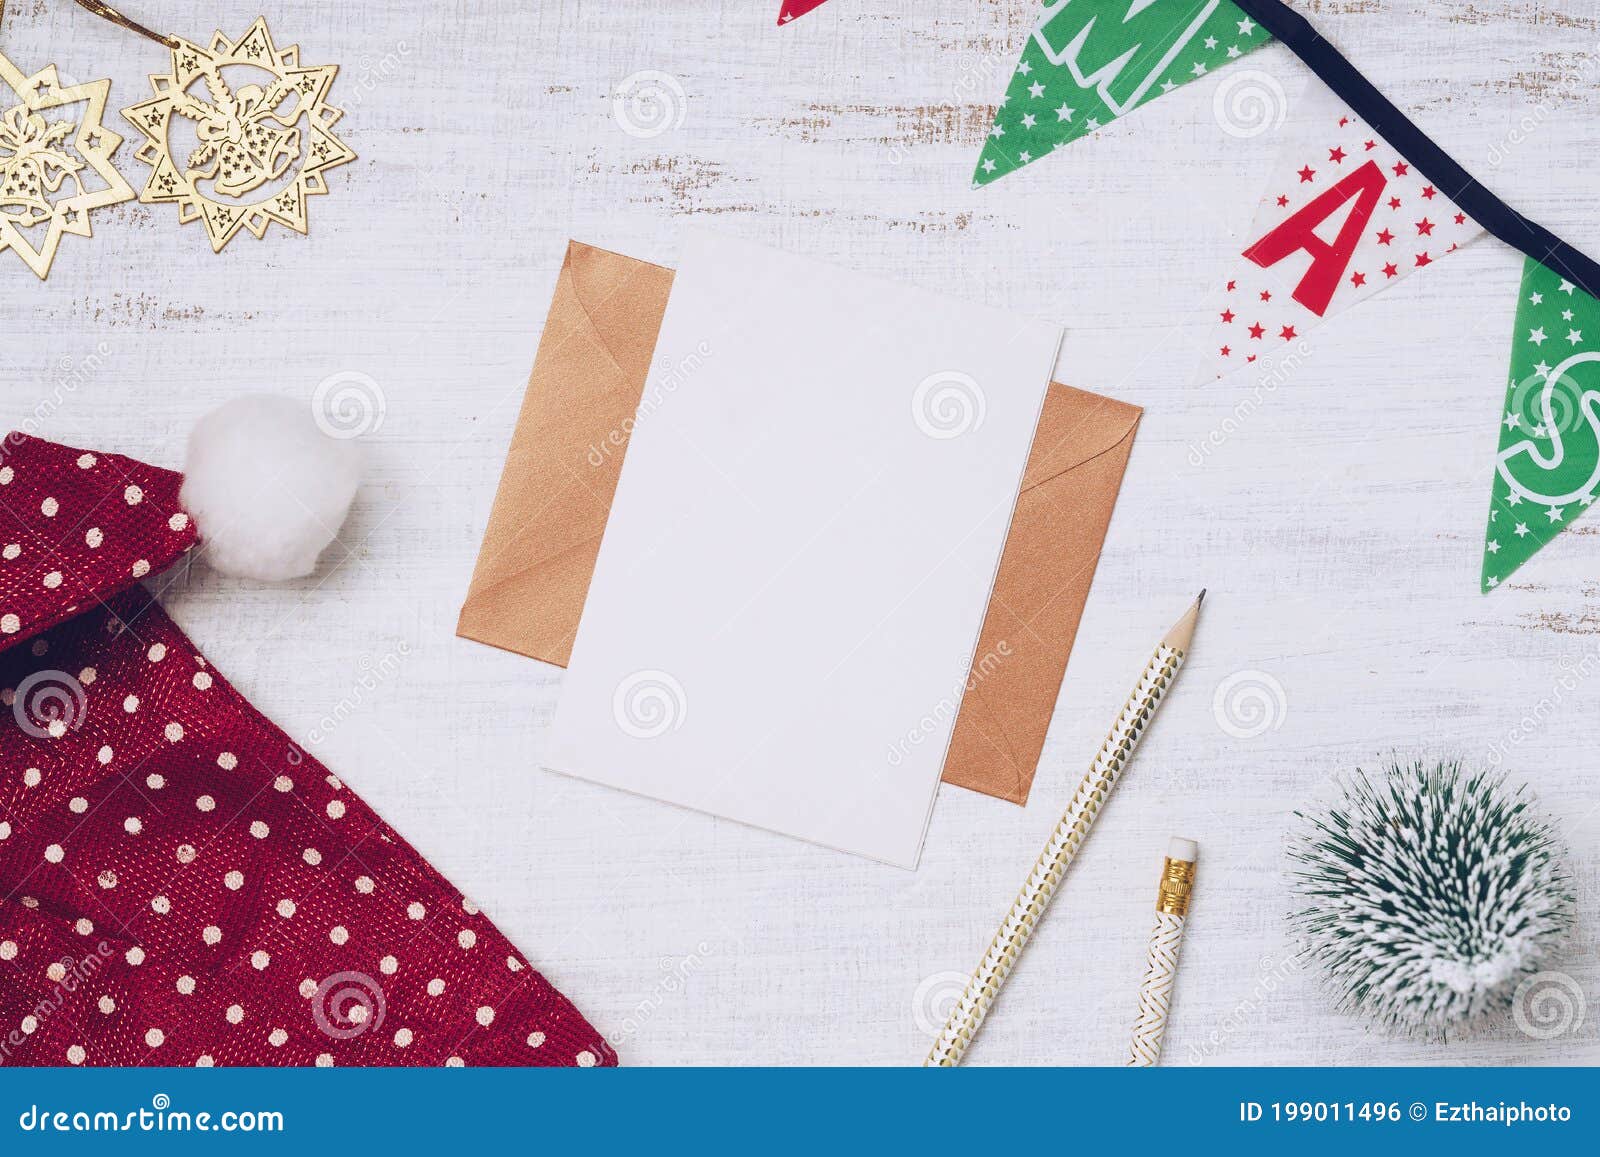 Download Mockup Blank Christmas Card And Gold Brown Envelope With ...